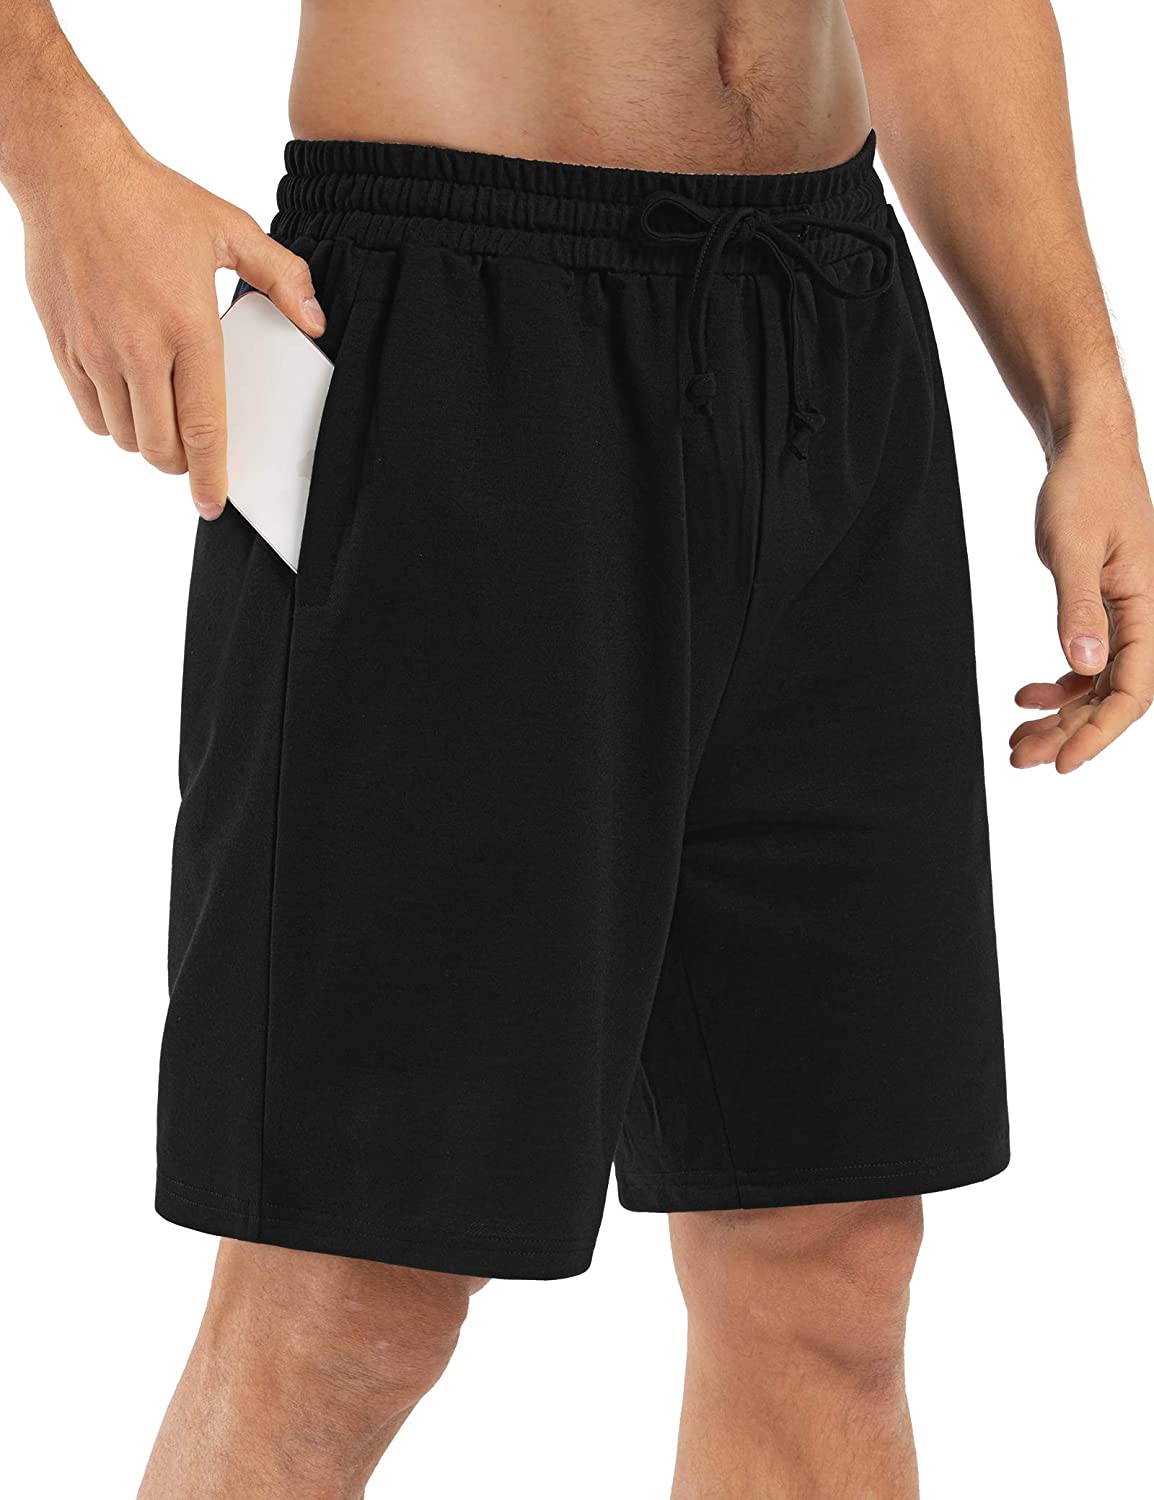 Sarin Mathews Mens 7” Shorts Casual Comfy Lounge Running Workout Athletic Gym Sweat Shorts with Pockets